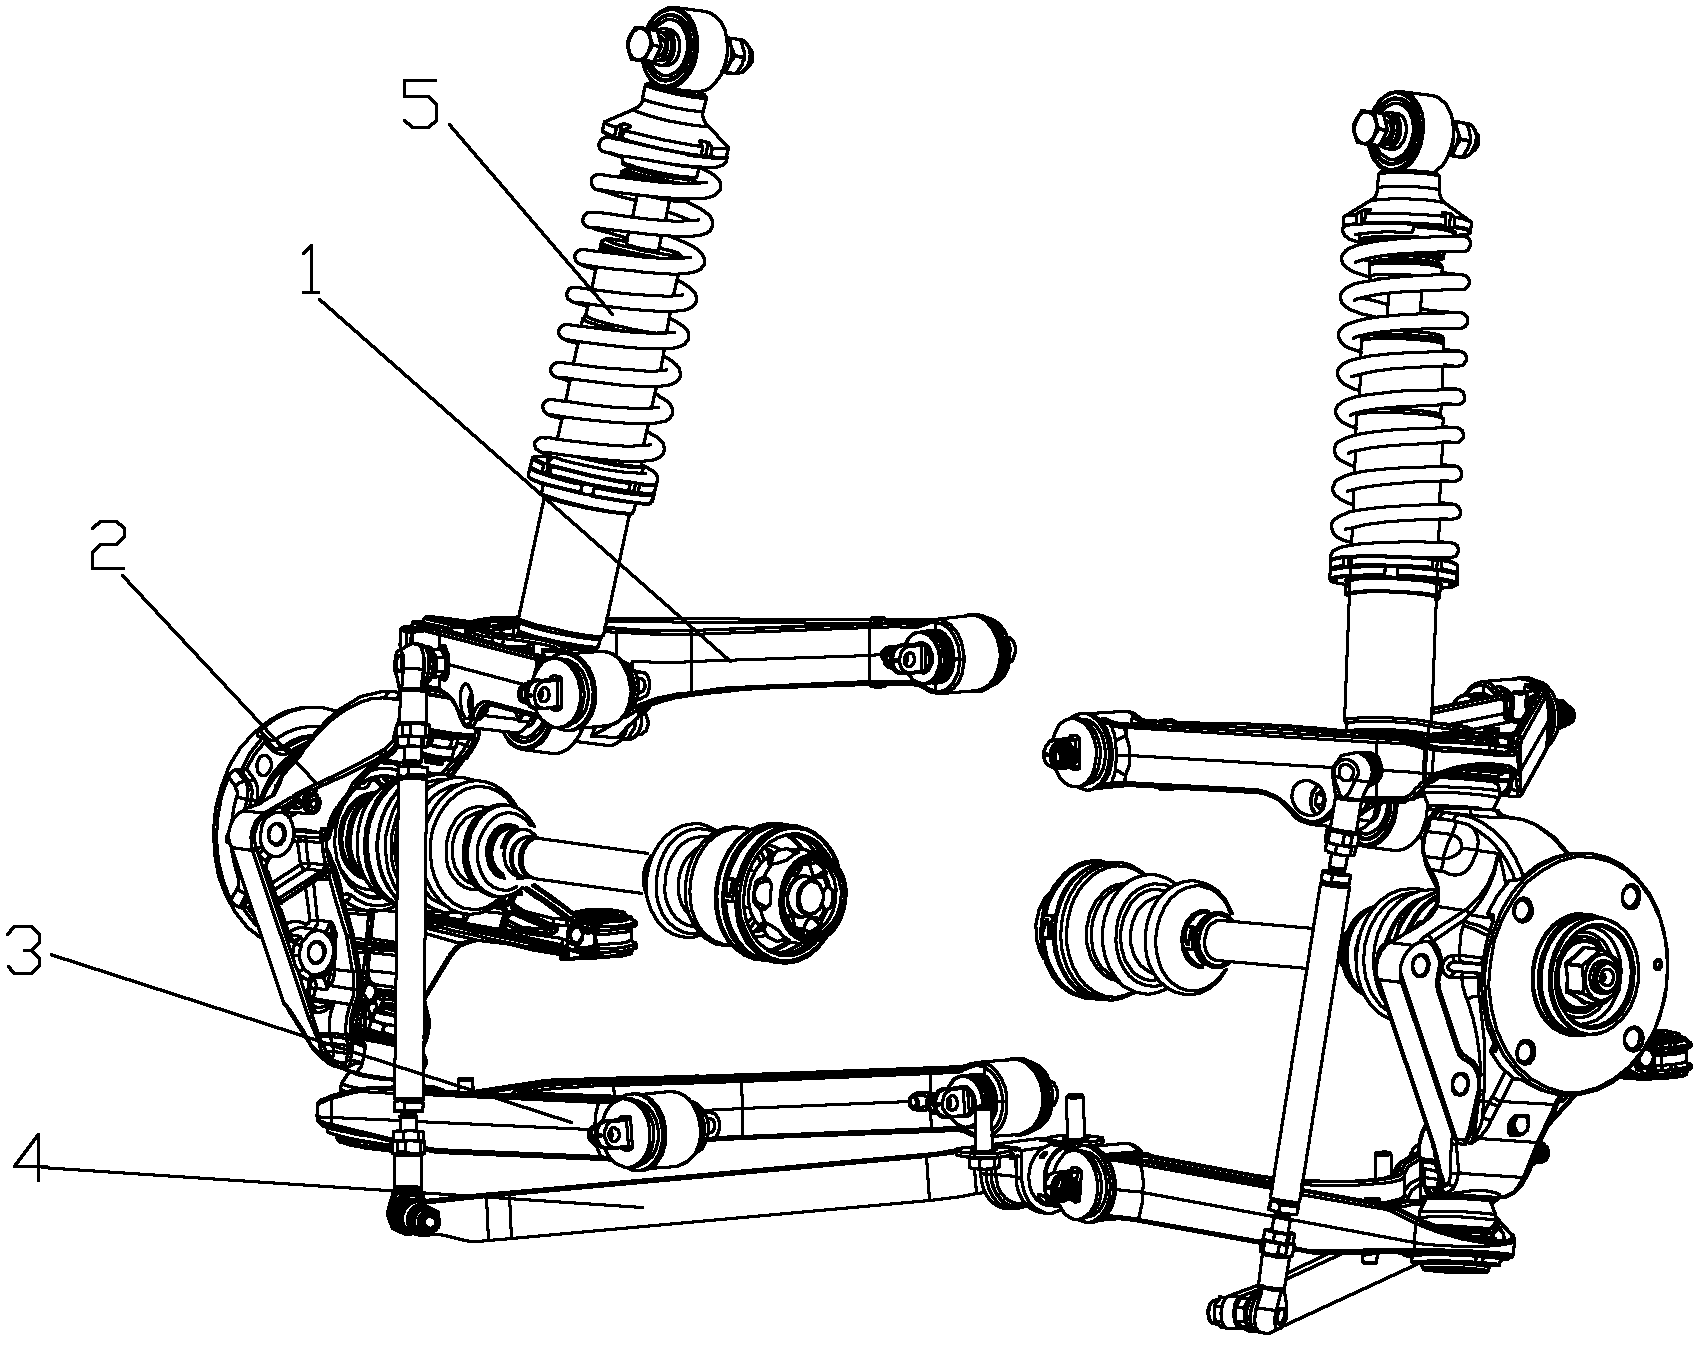 Vehicle double withbone arm type independent suspension system